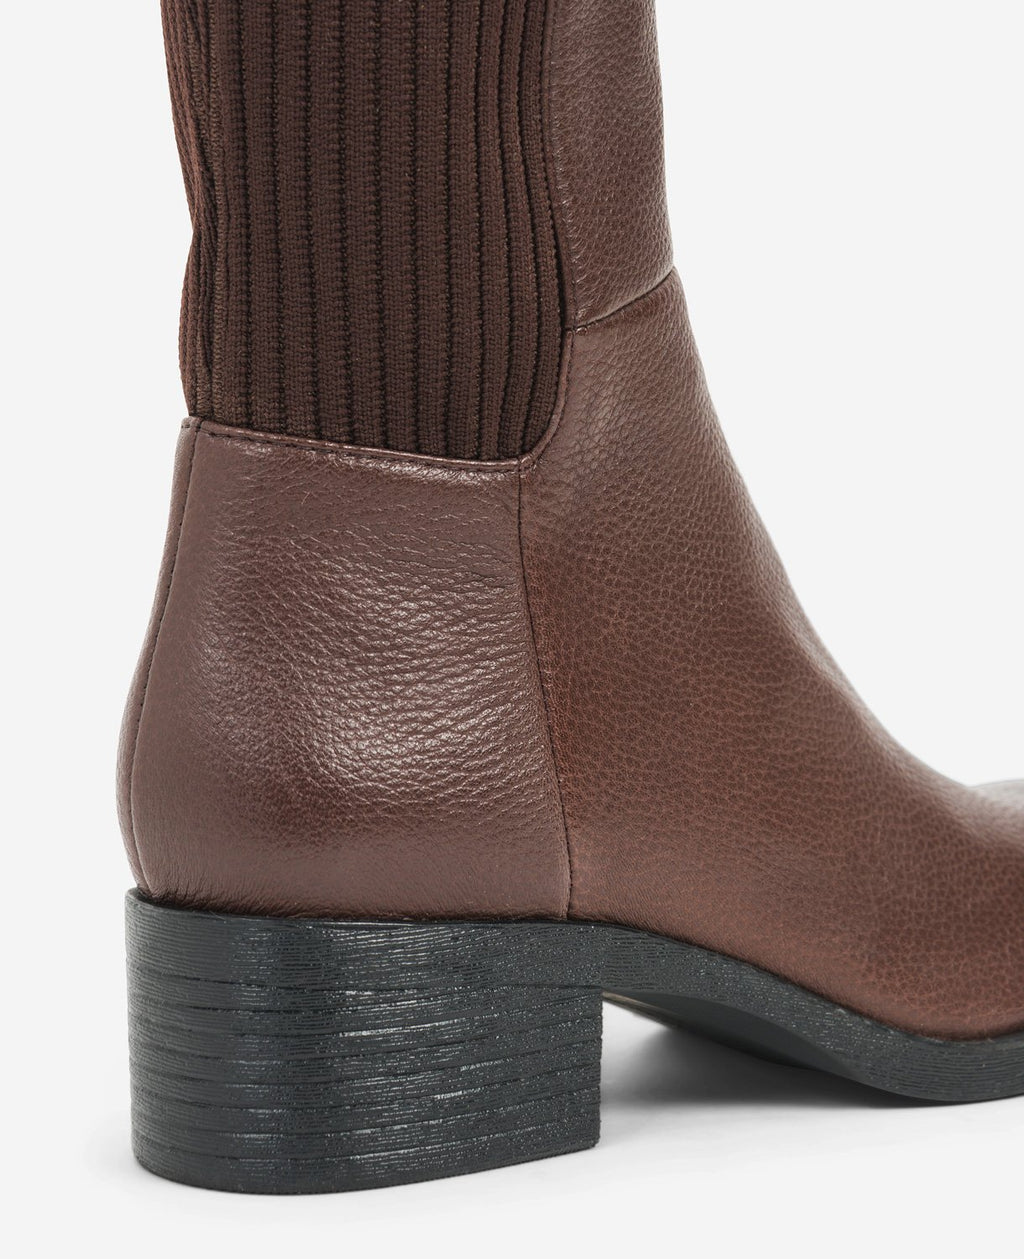 Levon Leather & Rib Knit Knee Boot Wide Calf